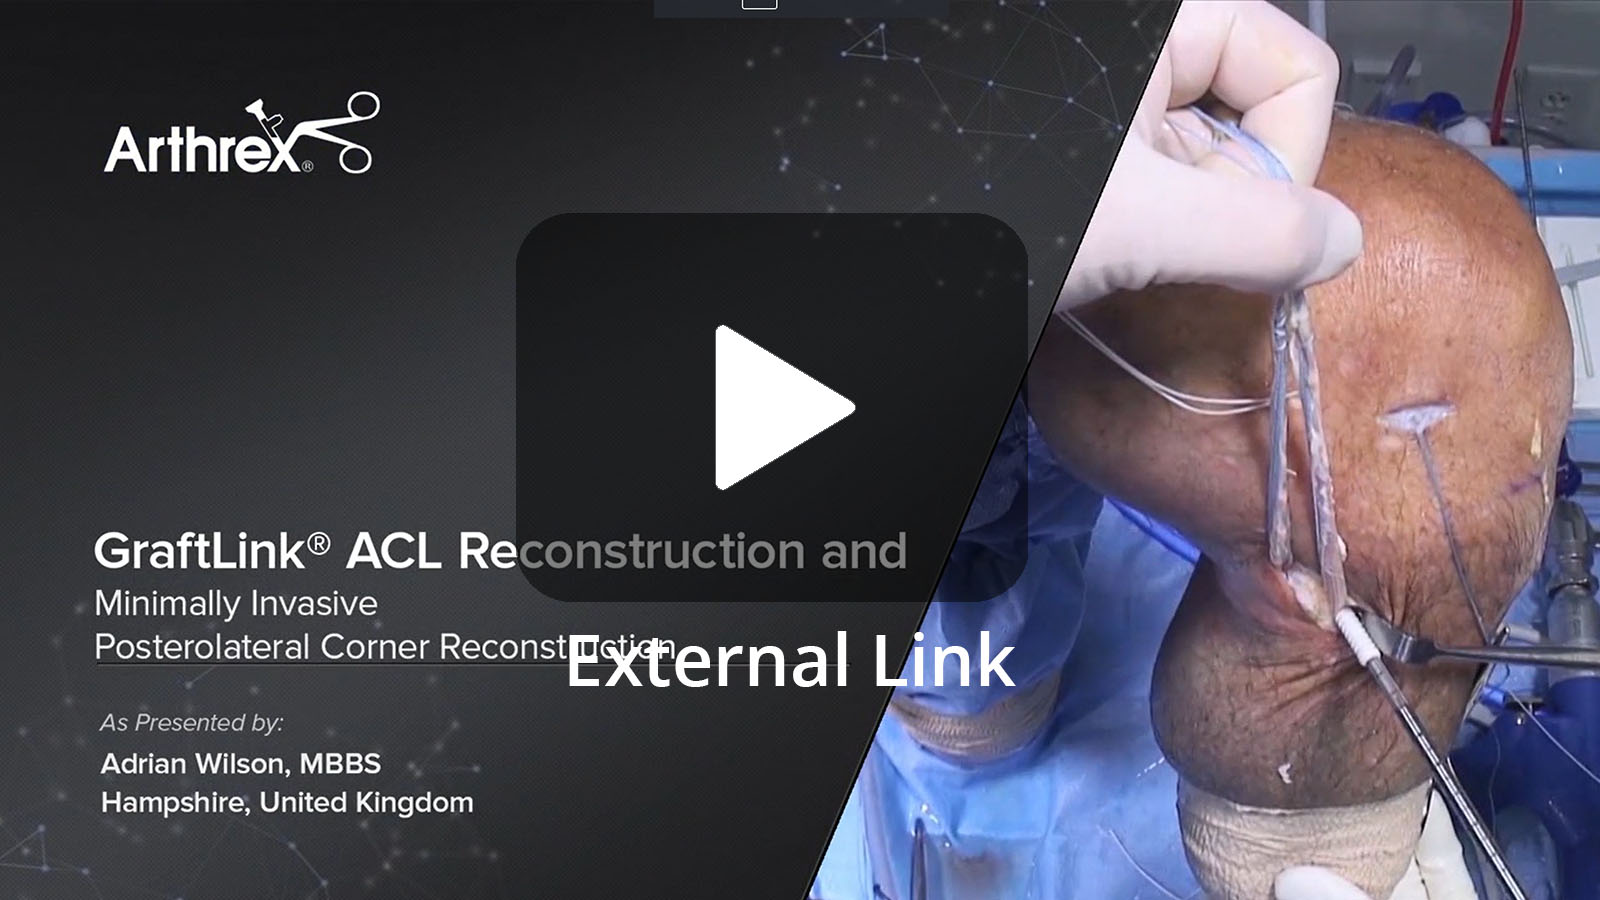 Pediatric ACL Reconstruction using the GraftLink® All-Epiphyseal Technique (External Link)